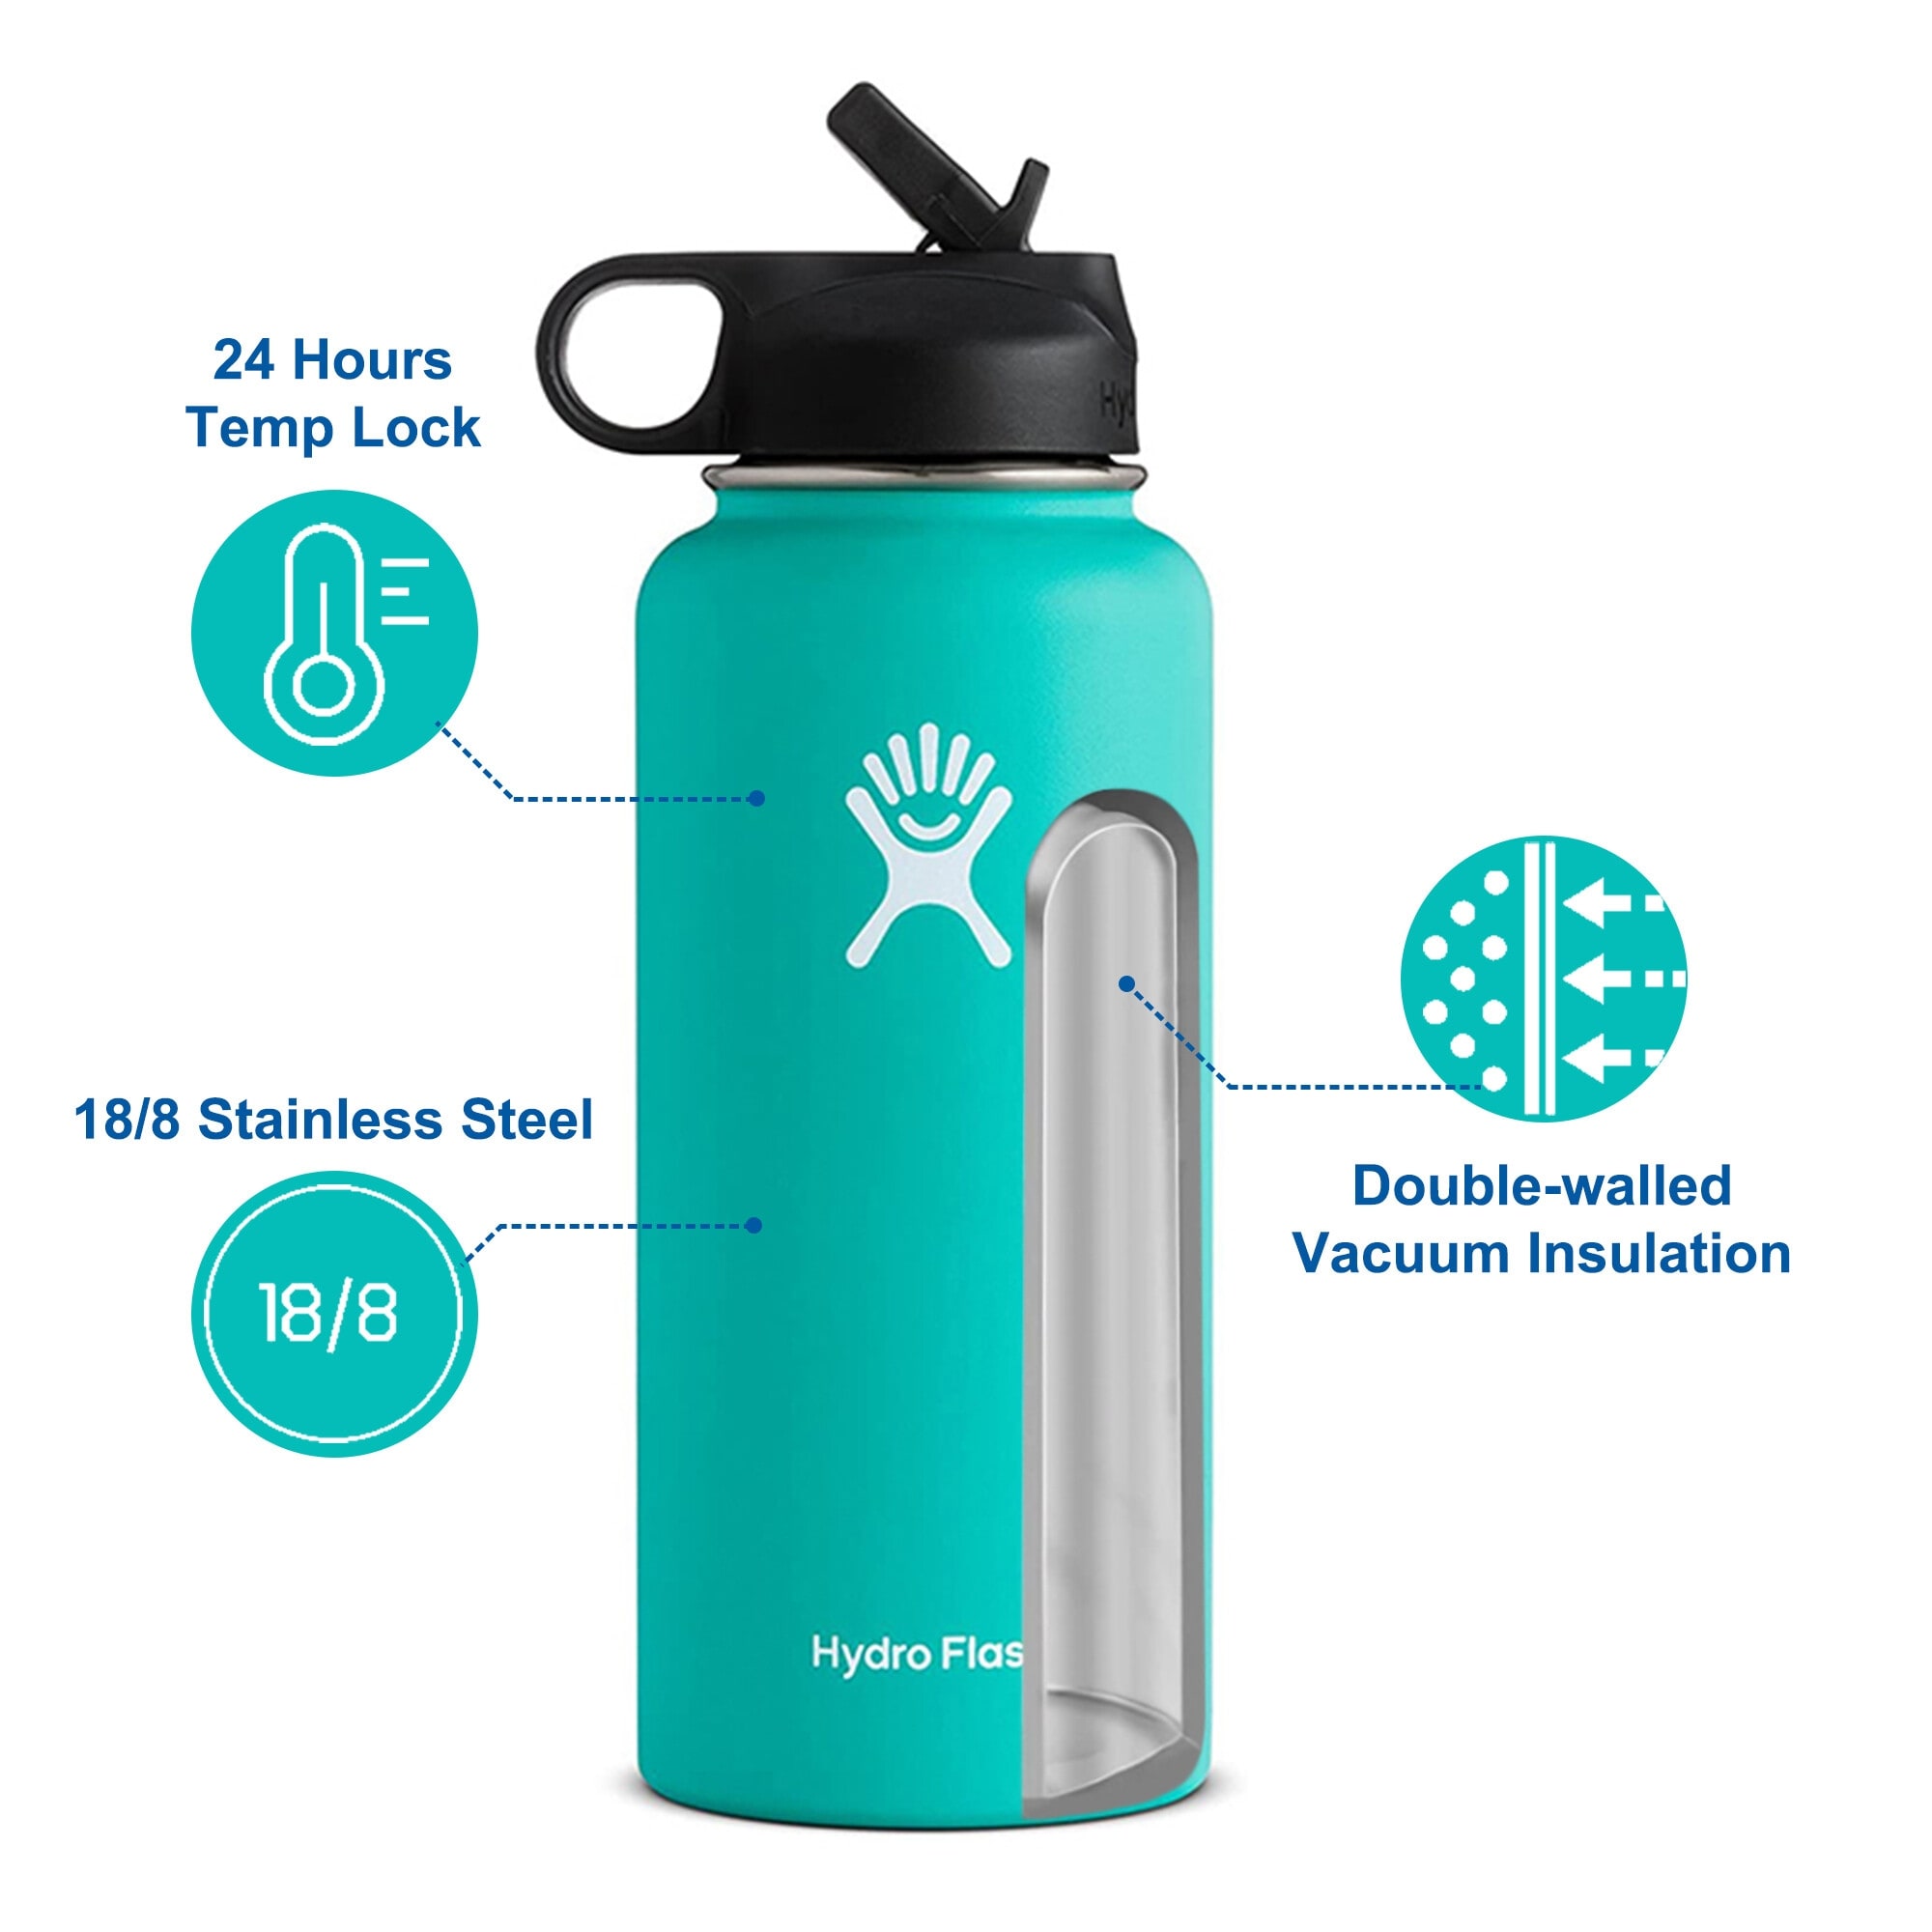 https://ak1.ostkcdn.com/images/products/is/images/direct/af4634dd7d8efa4925a8ed7e35c8d36c60bb384b/Hydro-Flask-32oz-Vacuum-Insulated-Stainless-Steel-Water-Bottle-Wide-Mouth-with-Straw-Lid.jpg